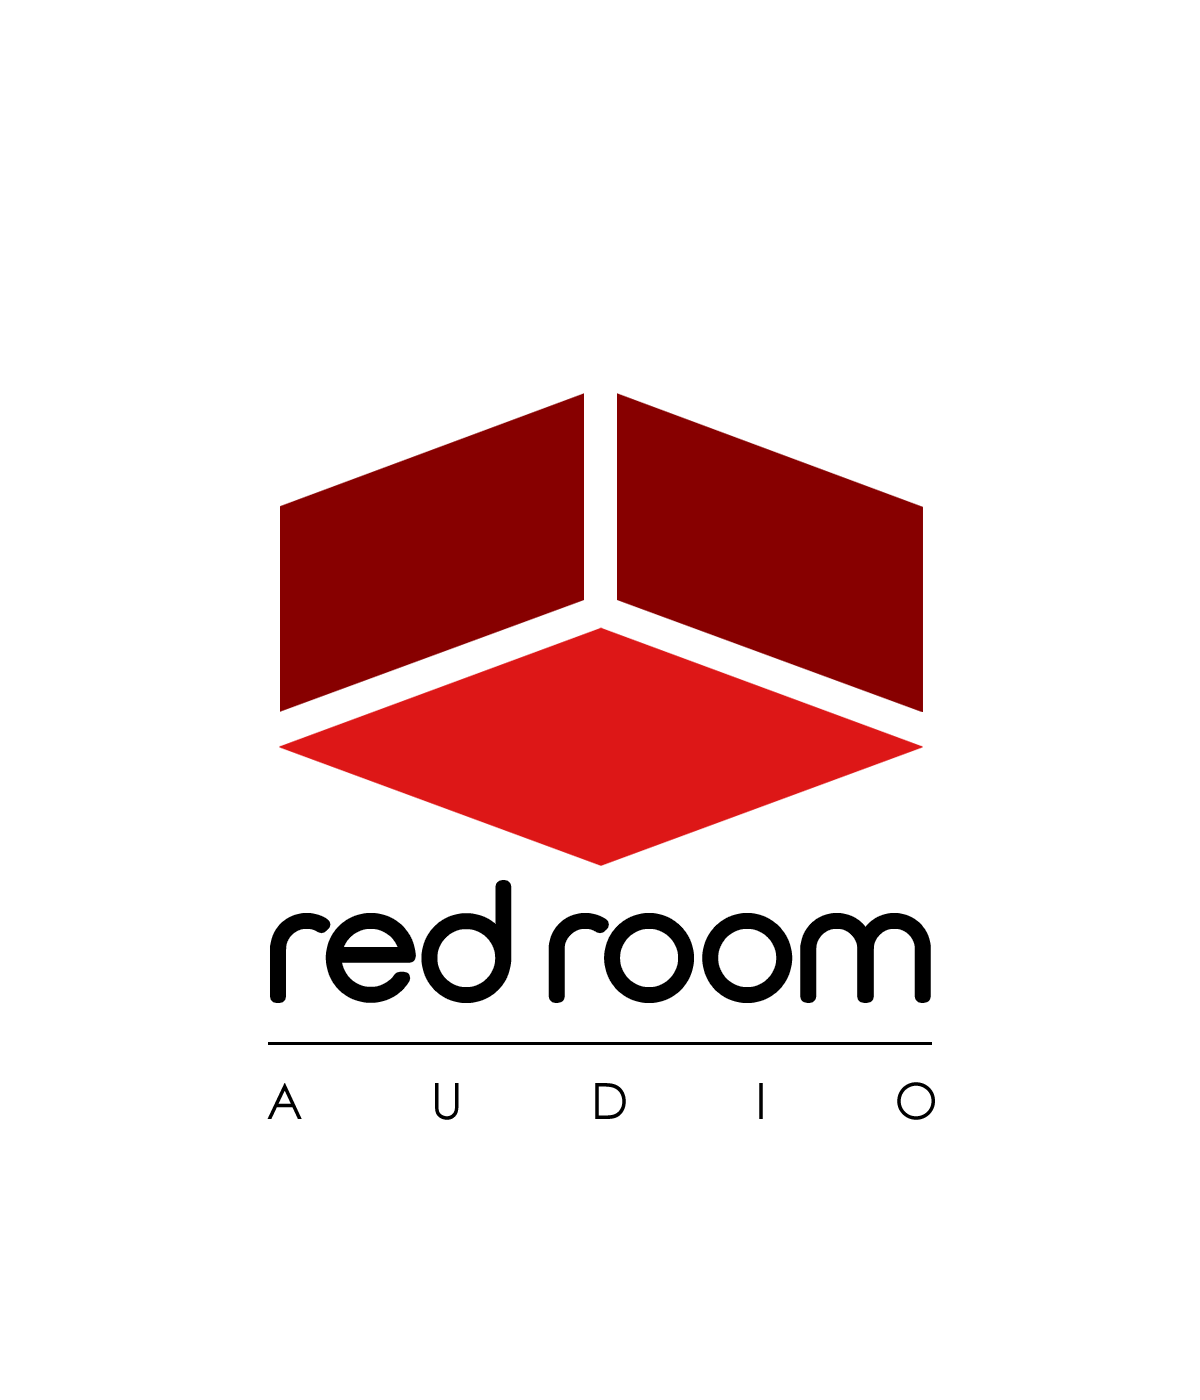 Black and Red Company Logo - Press Materials Room Audio